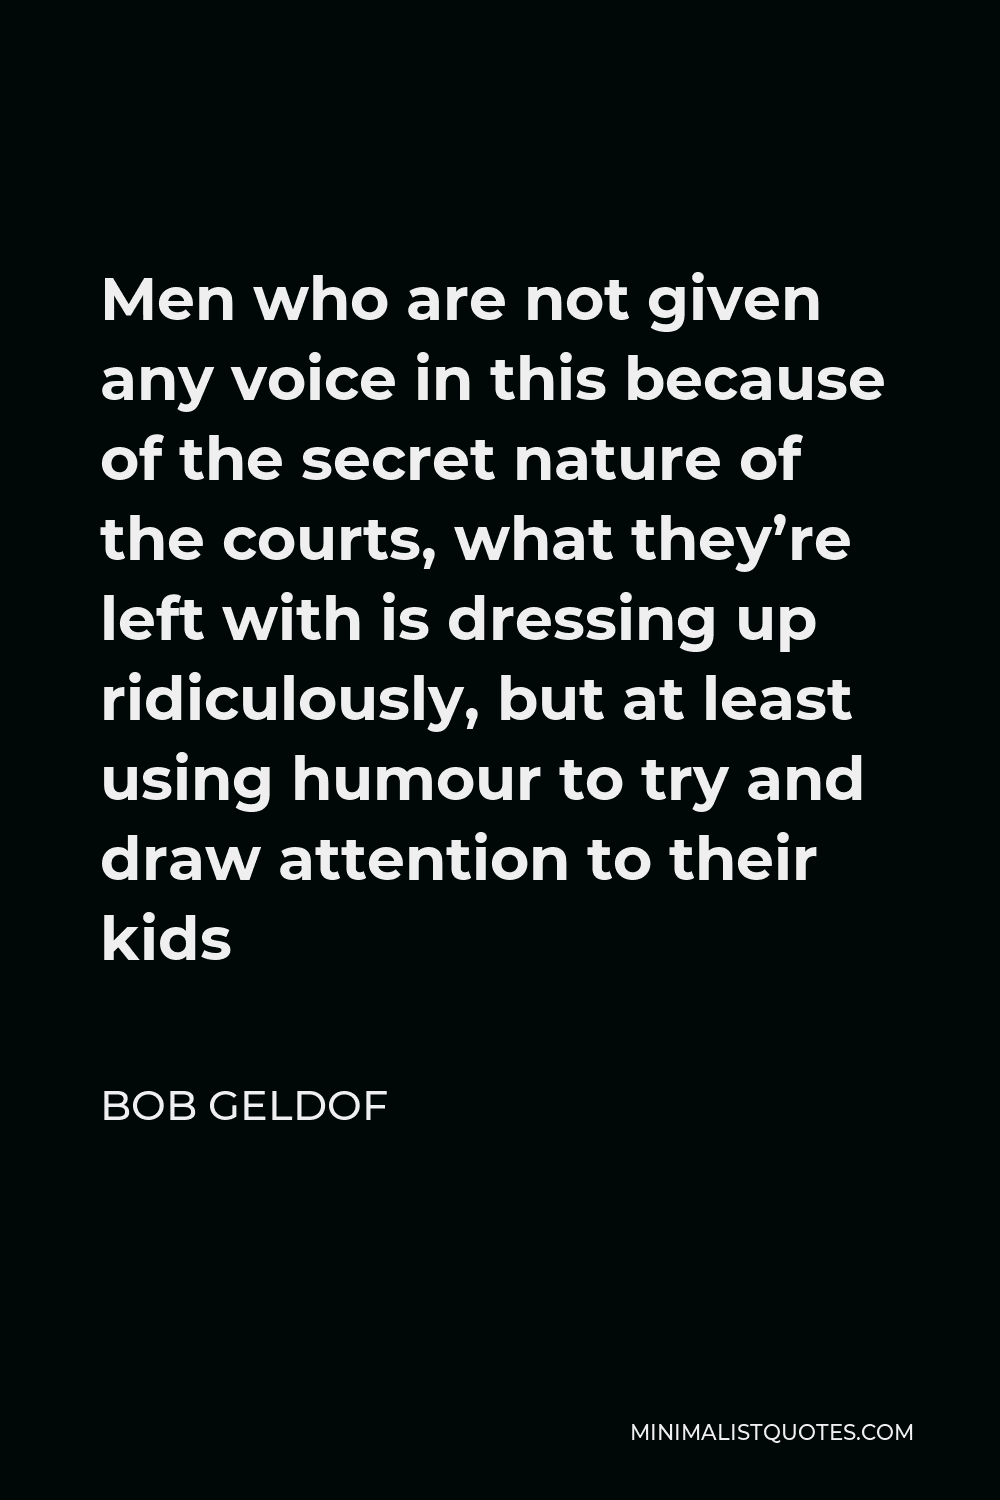 Bob Geldof Quote - Men who are not given any voice in this because of the secret nature of the courts, what they’re left with is dressing up ridiculously, but at least using humour to try and draw attention to their kids